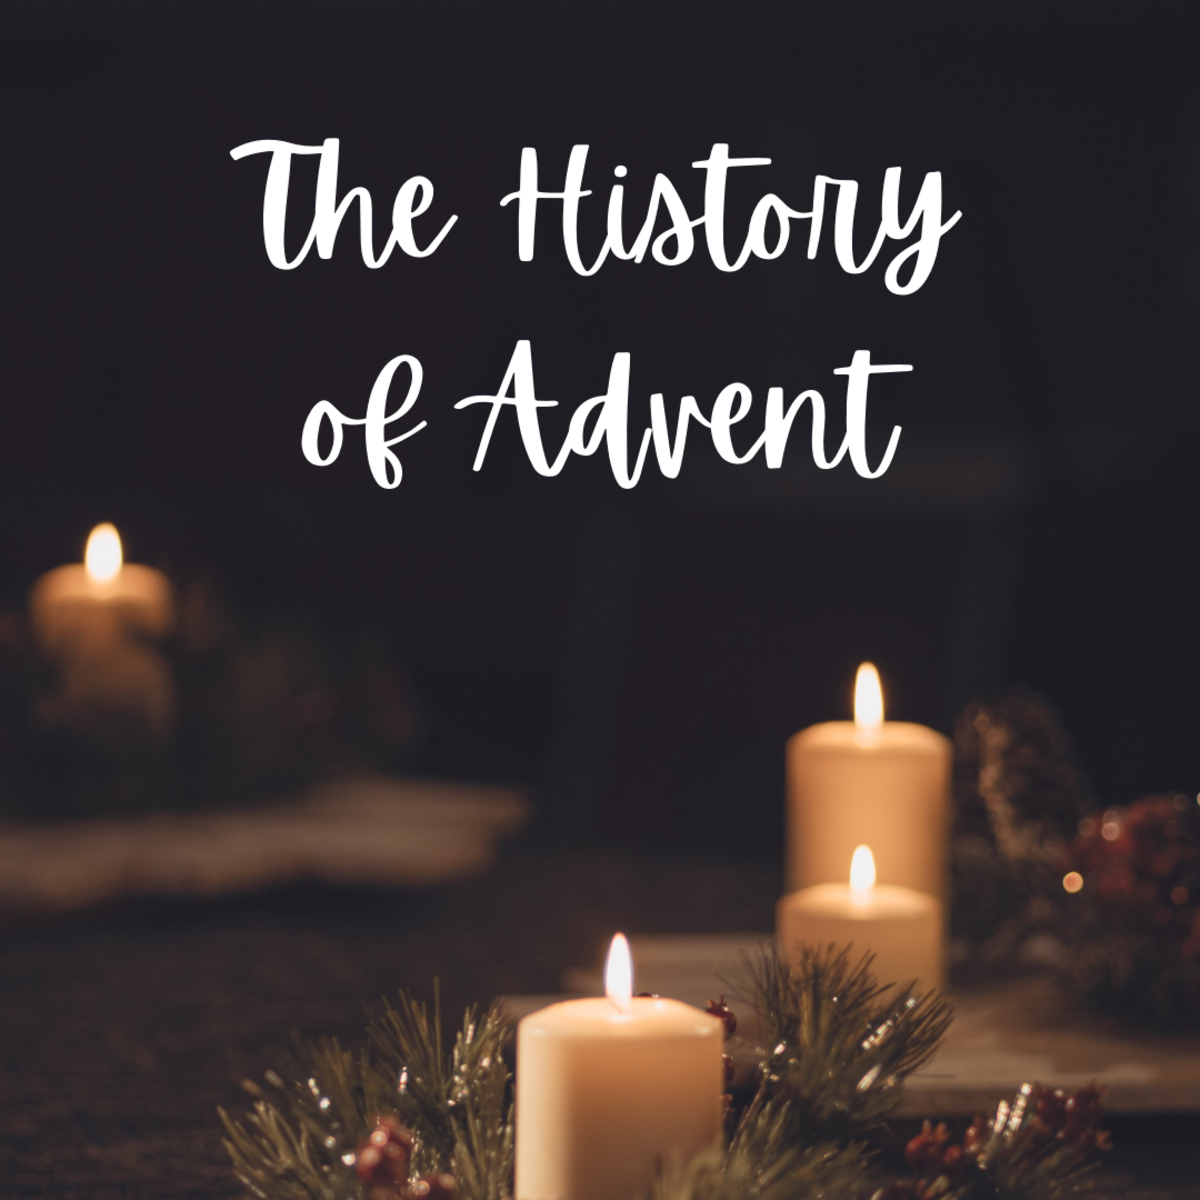 The History of Christmas Traditions: The Advent